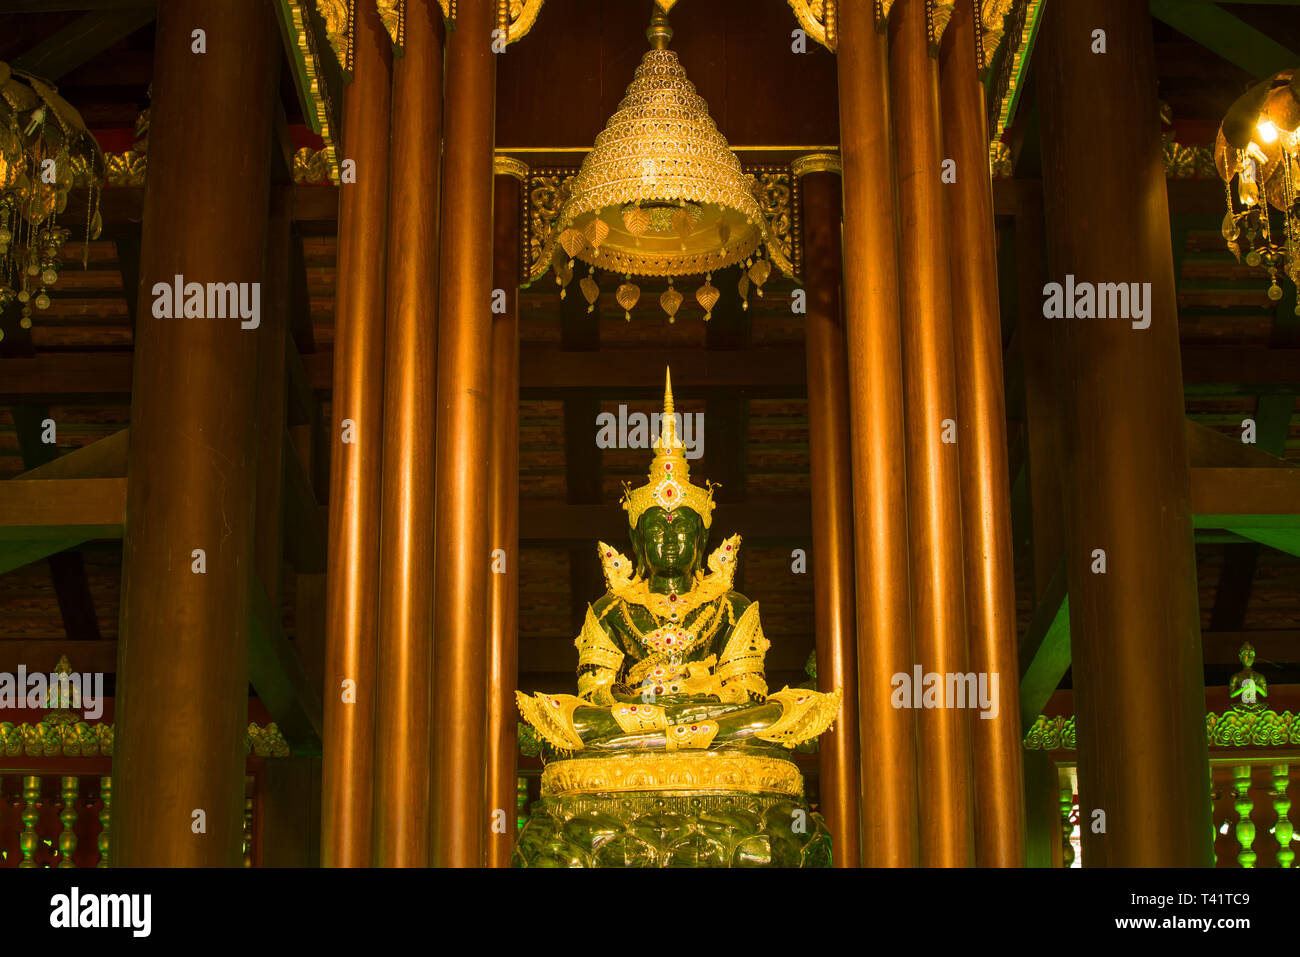 CHIANG RAI, THAILAND - DECEMBER 16, 2018: A copy of an ancient statue of the Emerald Buddha in a Buddhist temple Wat Phra Kaew Stock Photo